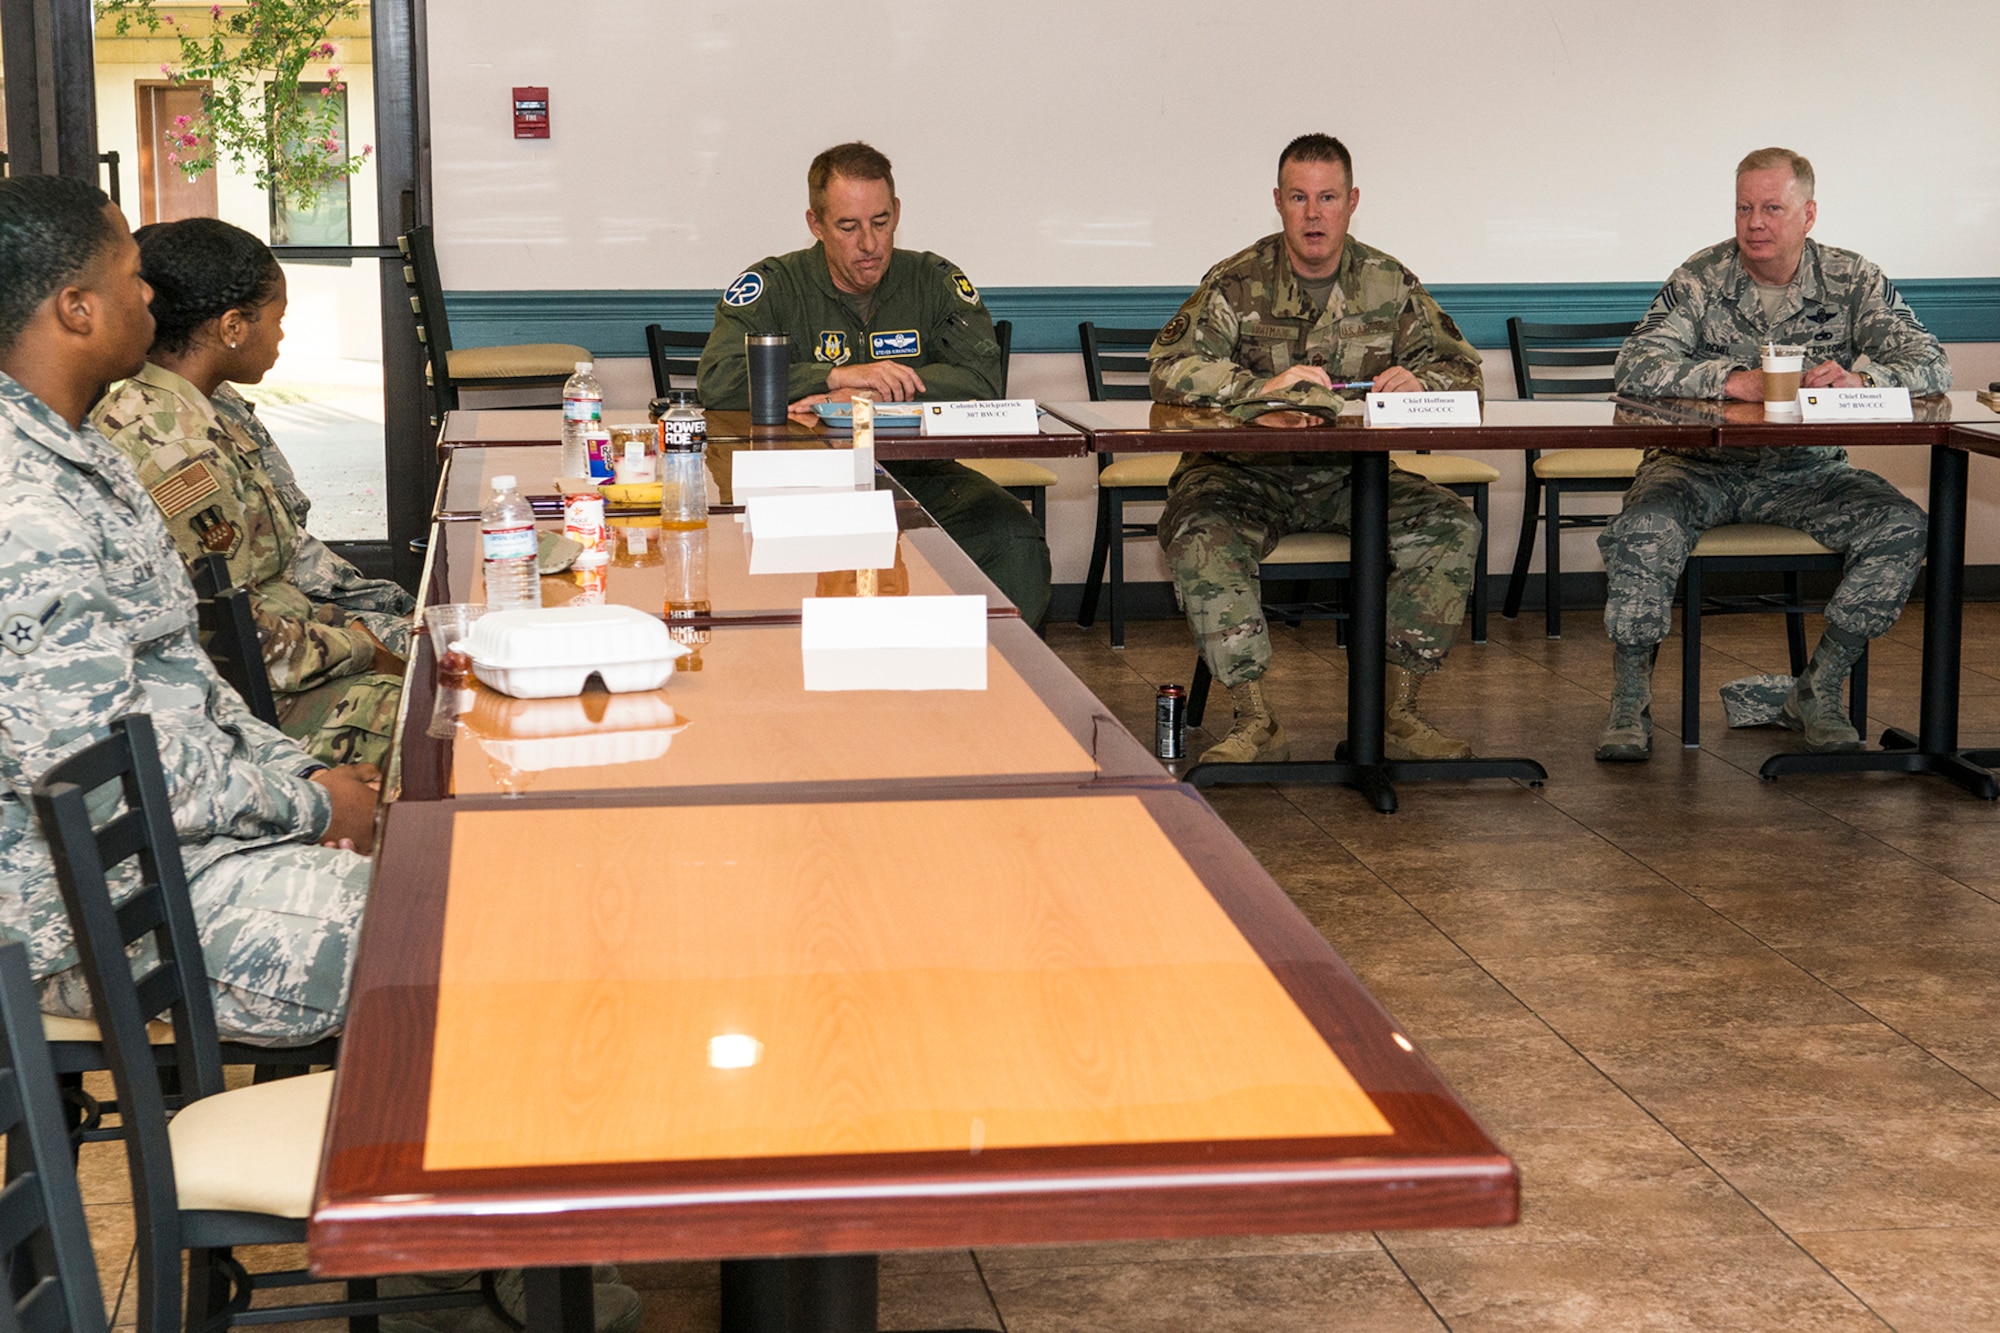 Chief Master Sgt. Charles Hoffman, command chief of Air Force Global Strike Command, visited the 307th Bomb Wing at Barksdale Air Force Base, Louisiana, Sept. 7, 2019. Hoffman spoke with Reserve Citizen Airmen from around the wing and was give the opportunity to familiarize himself with various facets of the wing's mission.